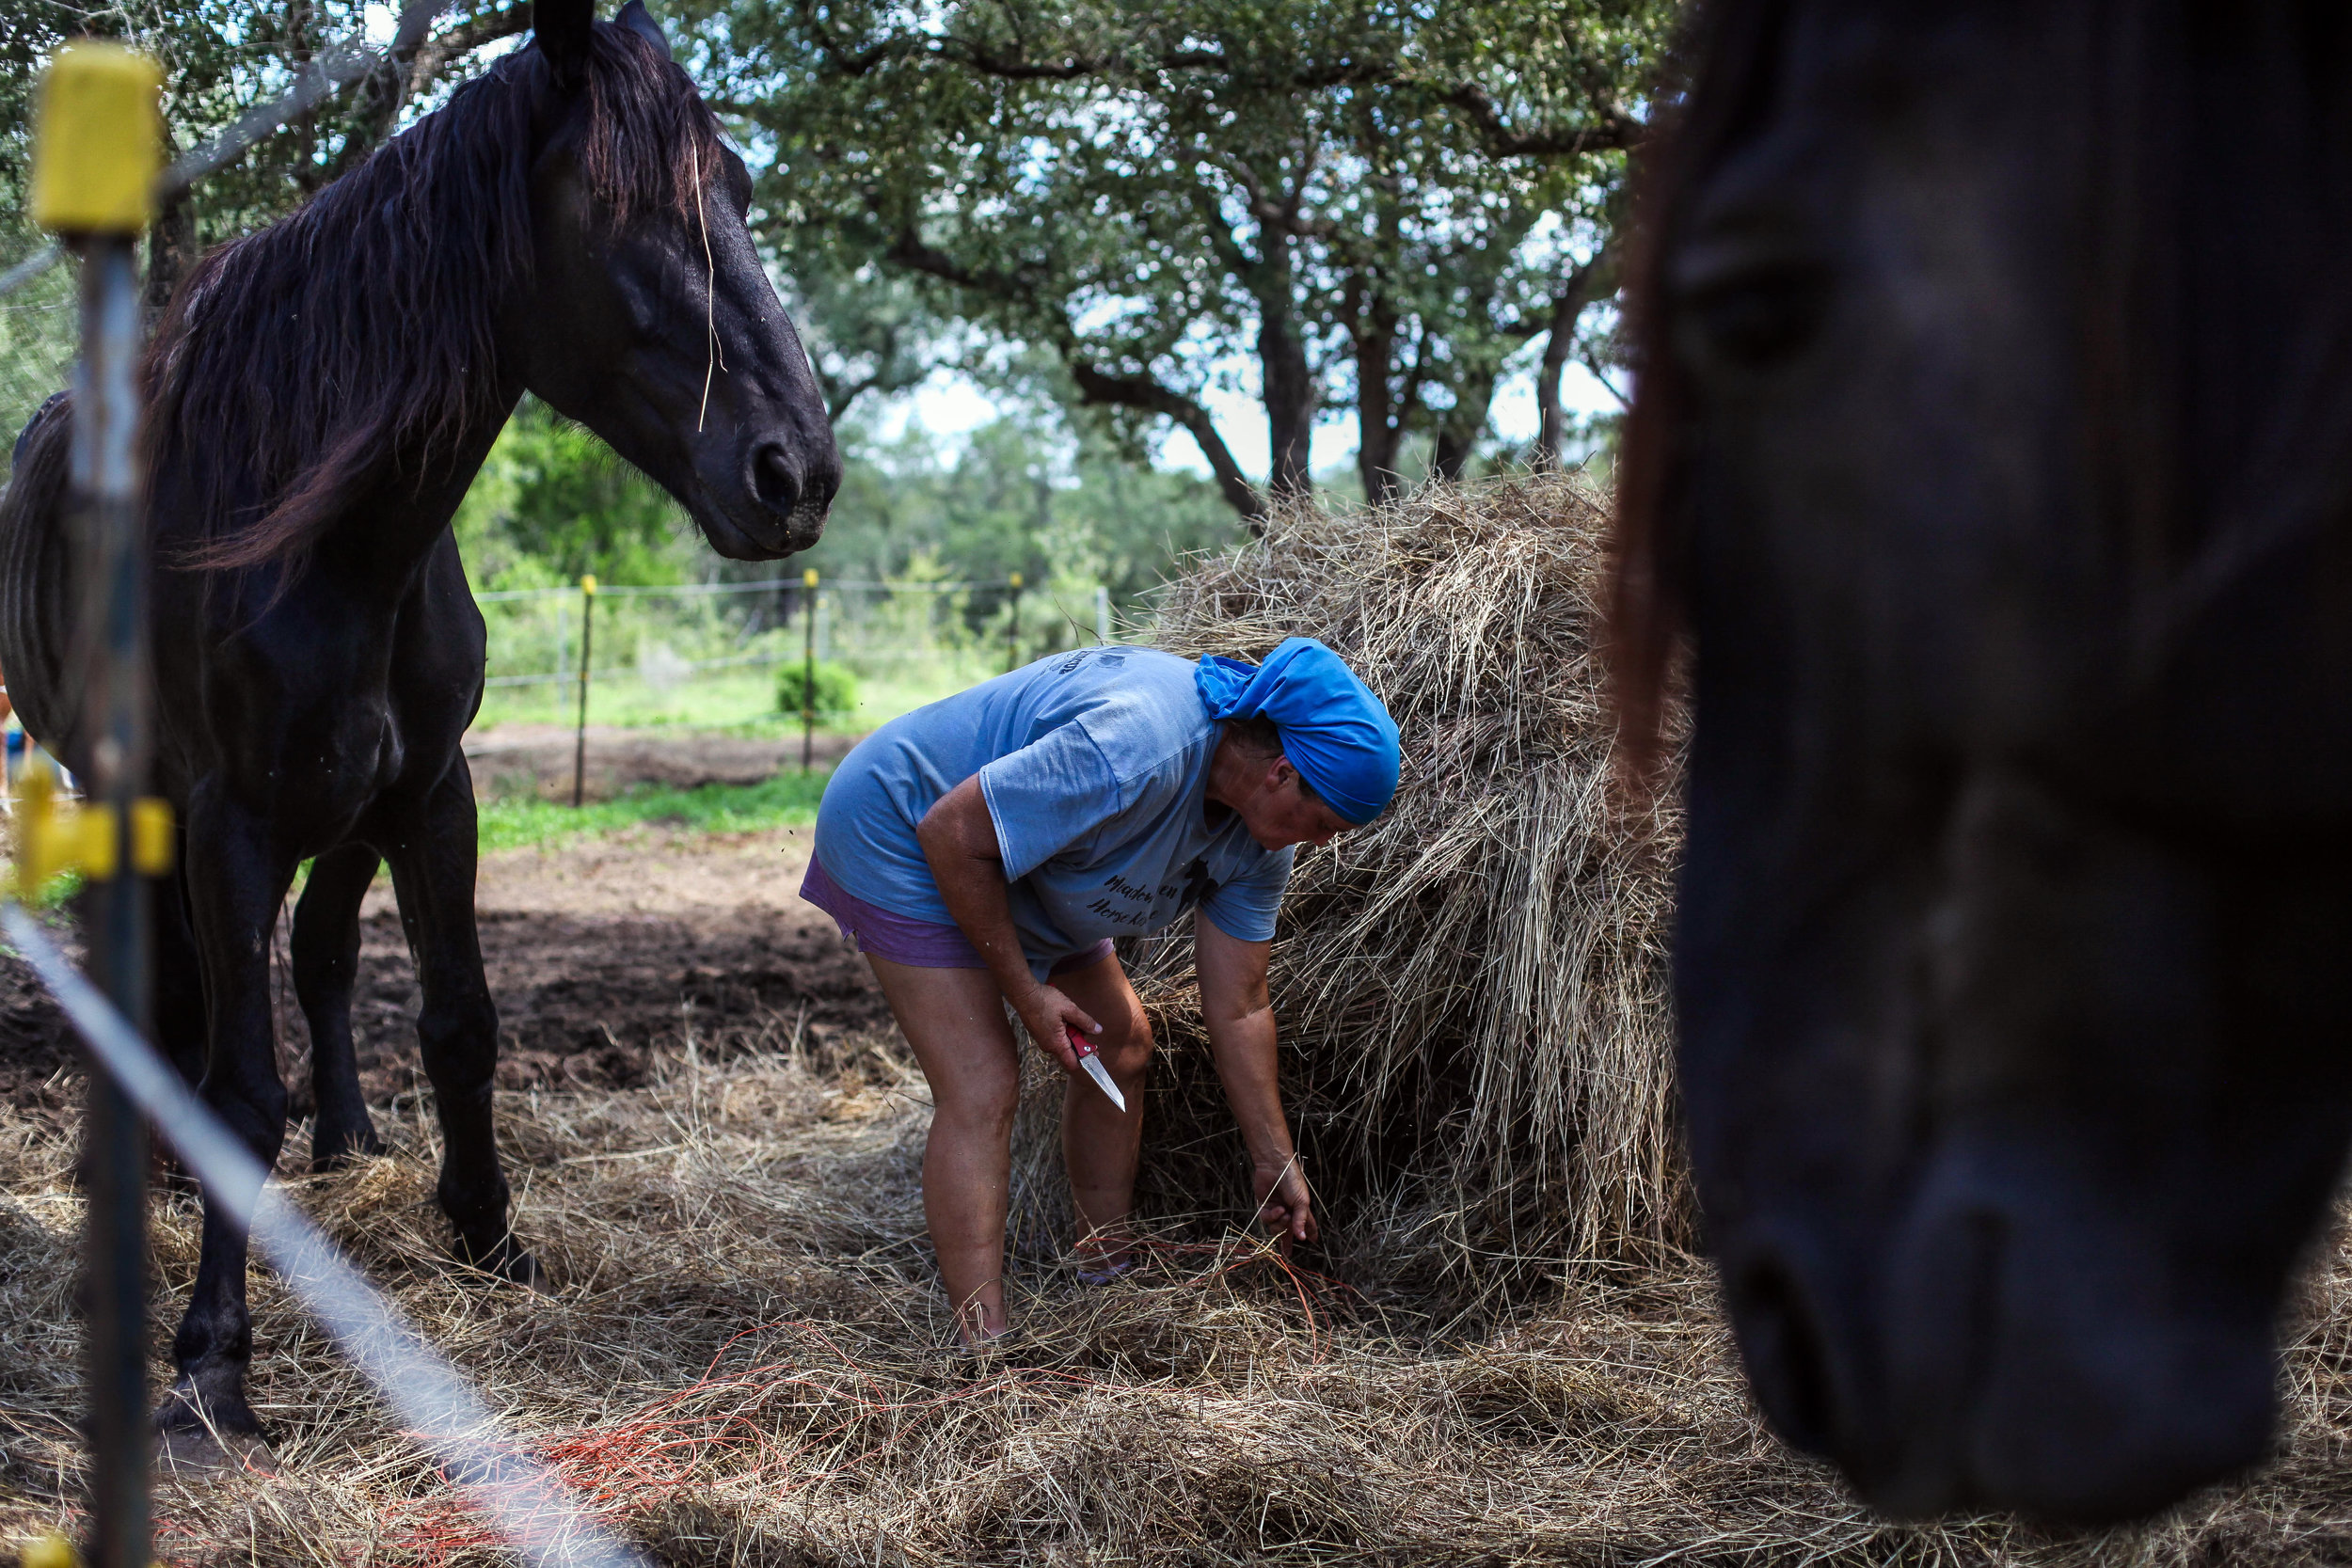  Darla Cherry, 54, cuts the binding strings from the hale bays at Meadow Haven Horse Rescue on Tuesday, Sept. 25, 2018. With over 200 horses, it takes Cherry nearly five hours just to feed everyone. 